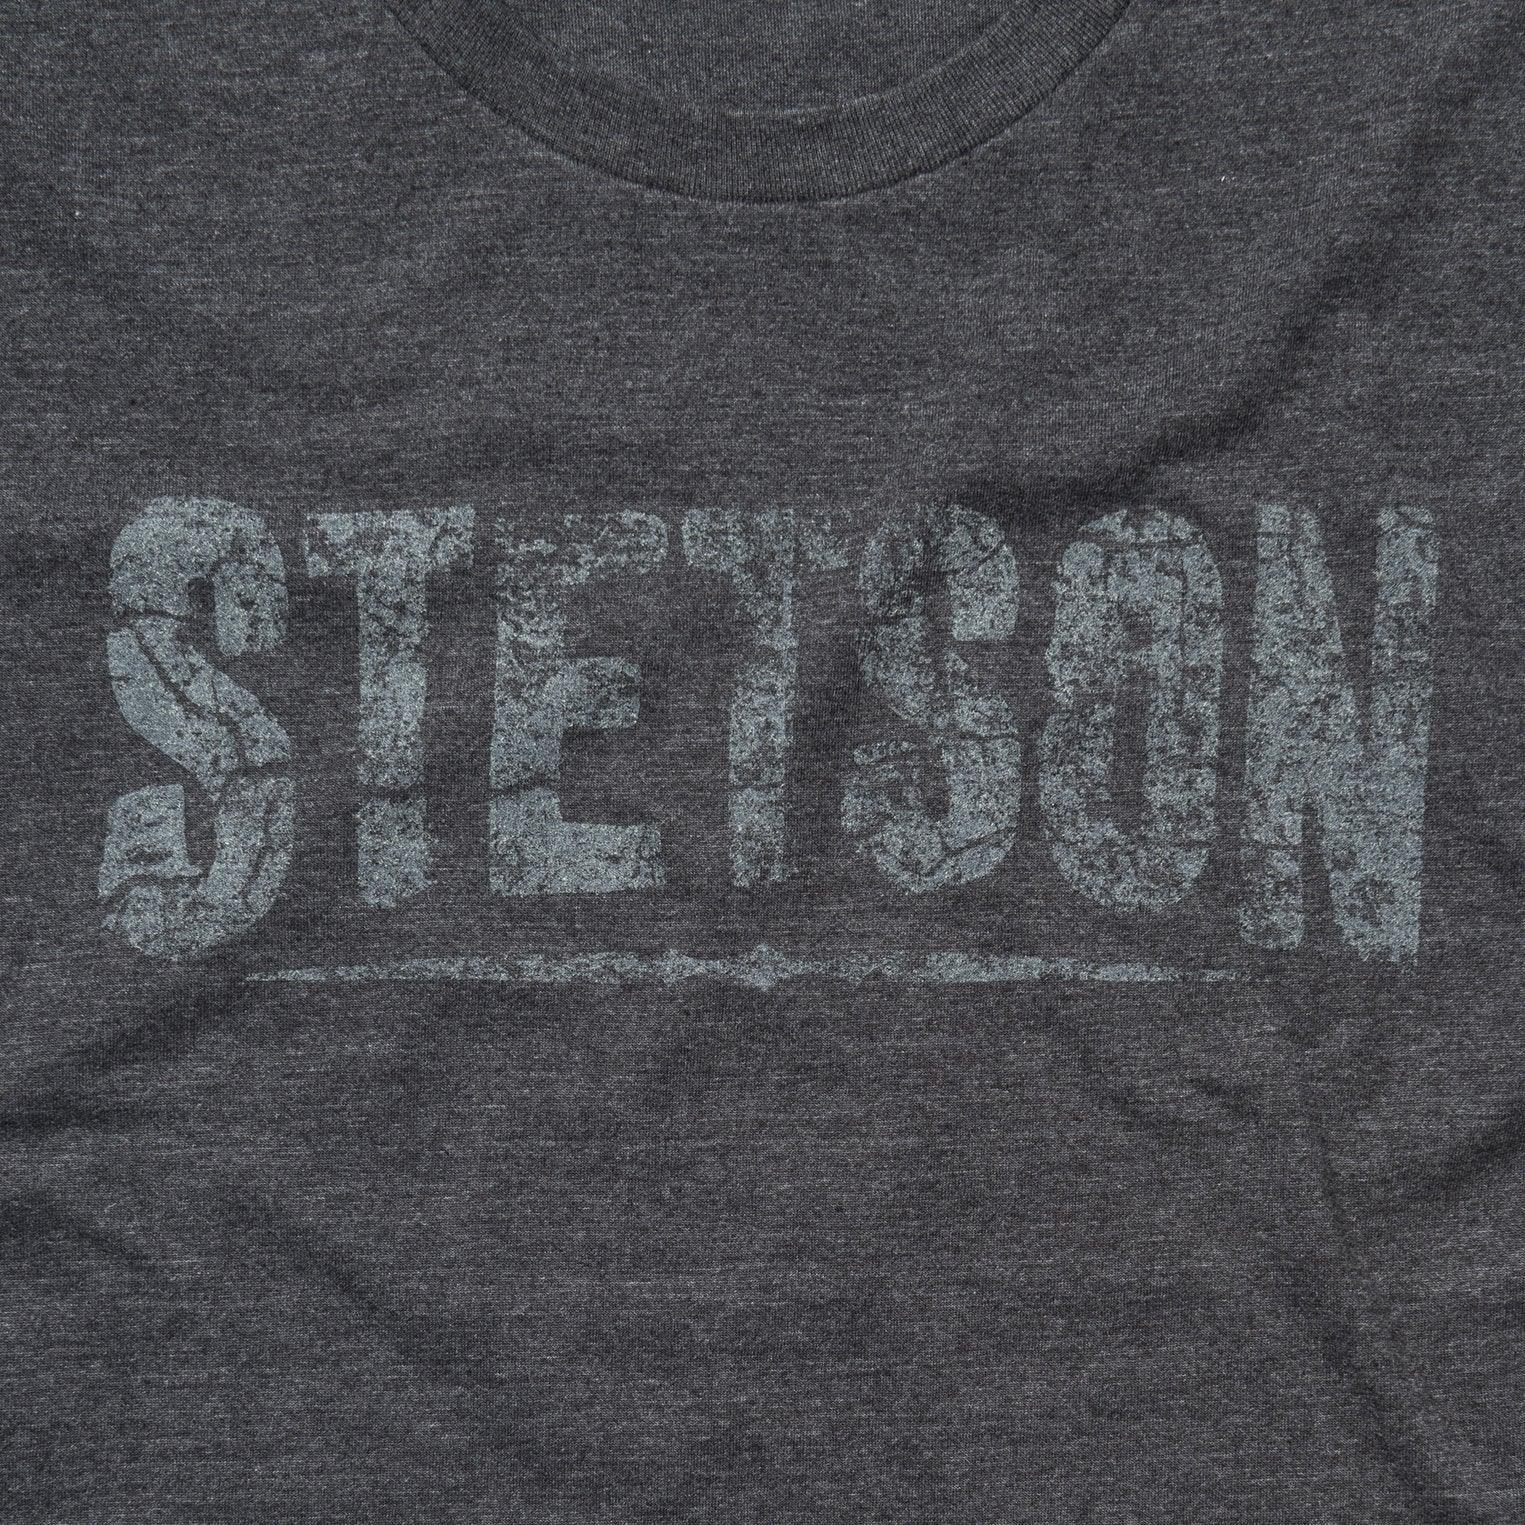 Stetson Distressed Stetson Graphic Tee - Flyclothing LLC